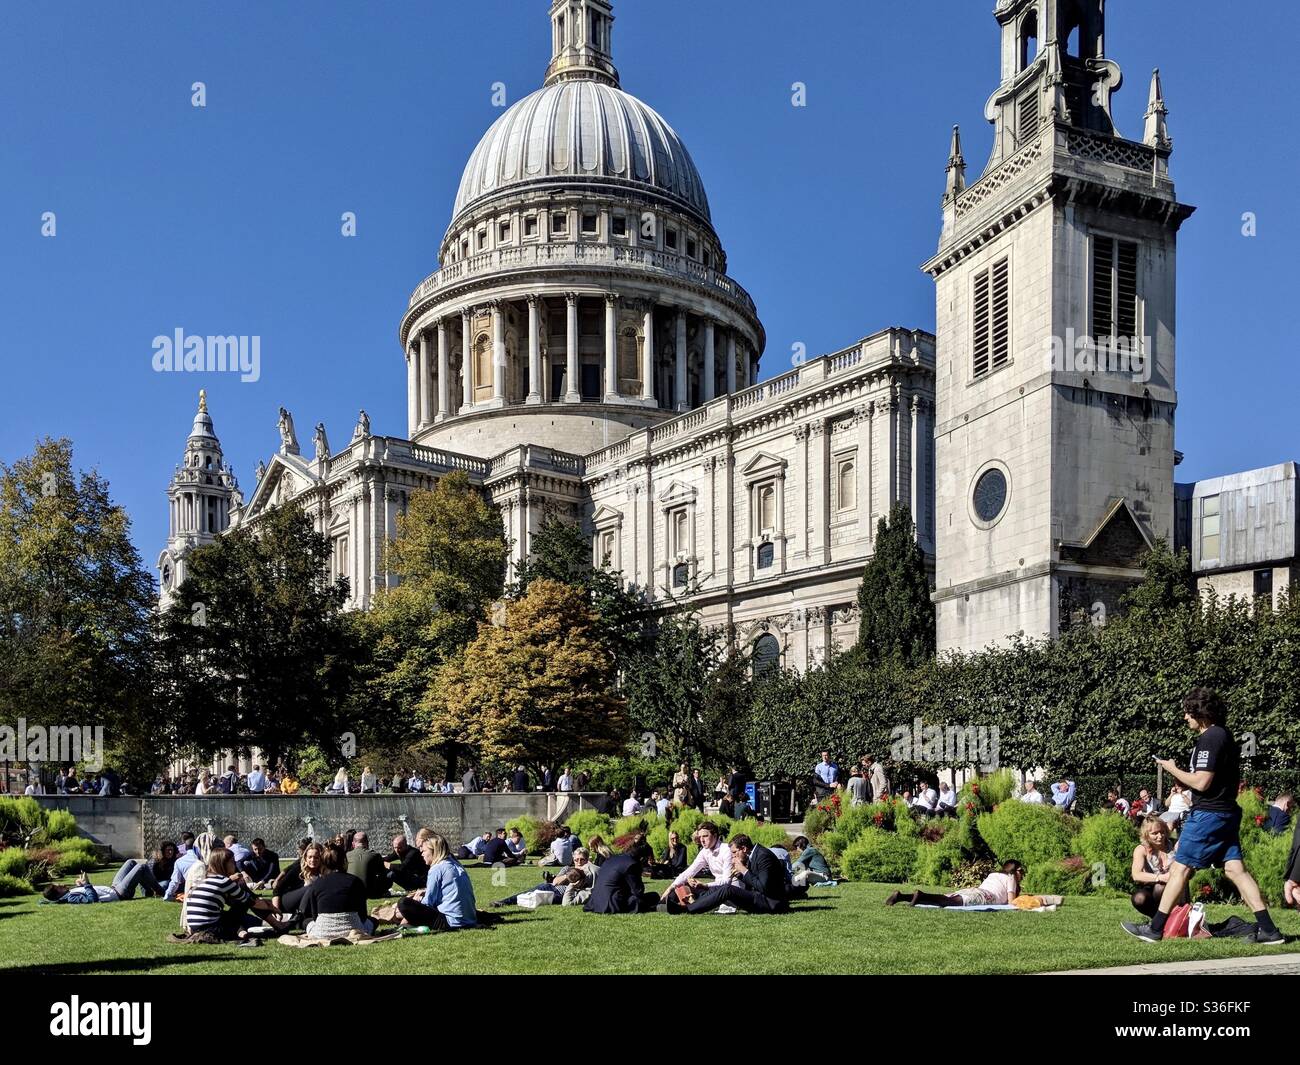 St.Pauls cathedral ground with hundreds of people enjoying Sun during lunchtime Stock Photo